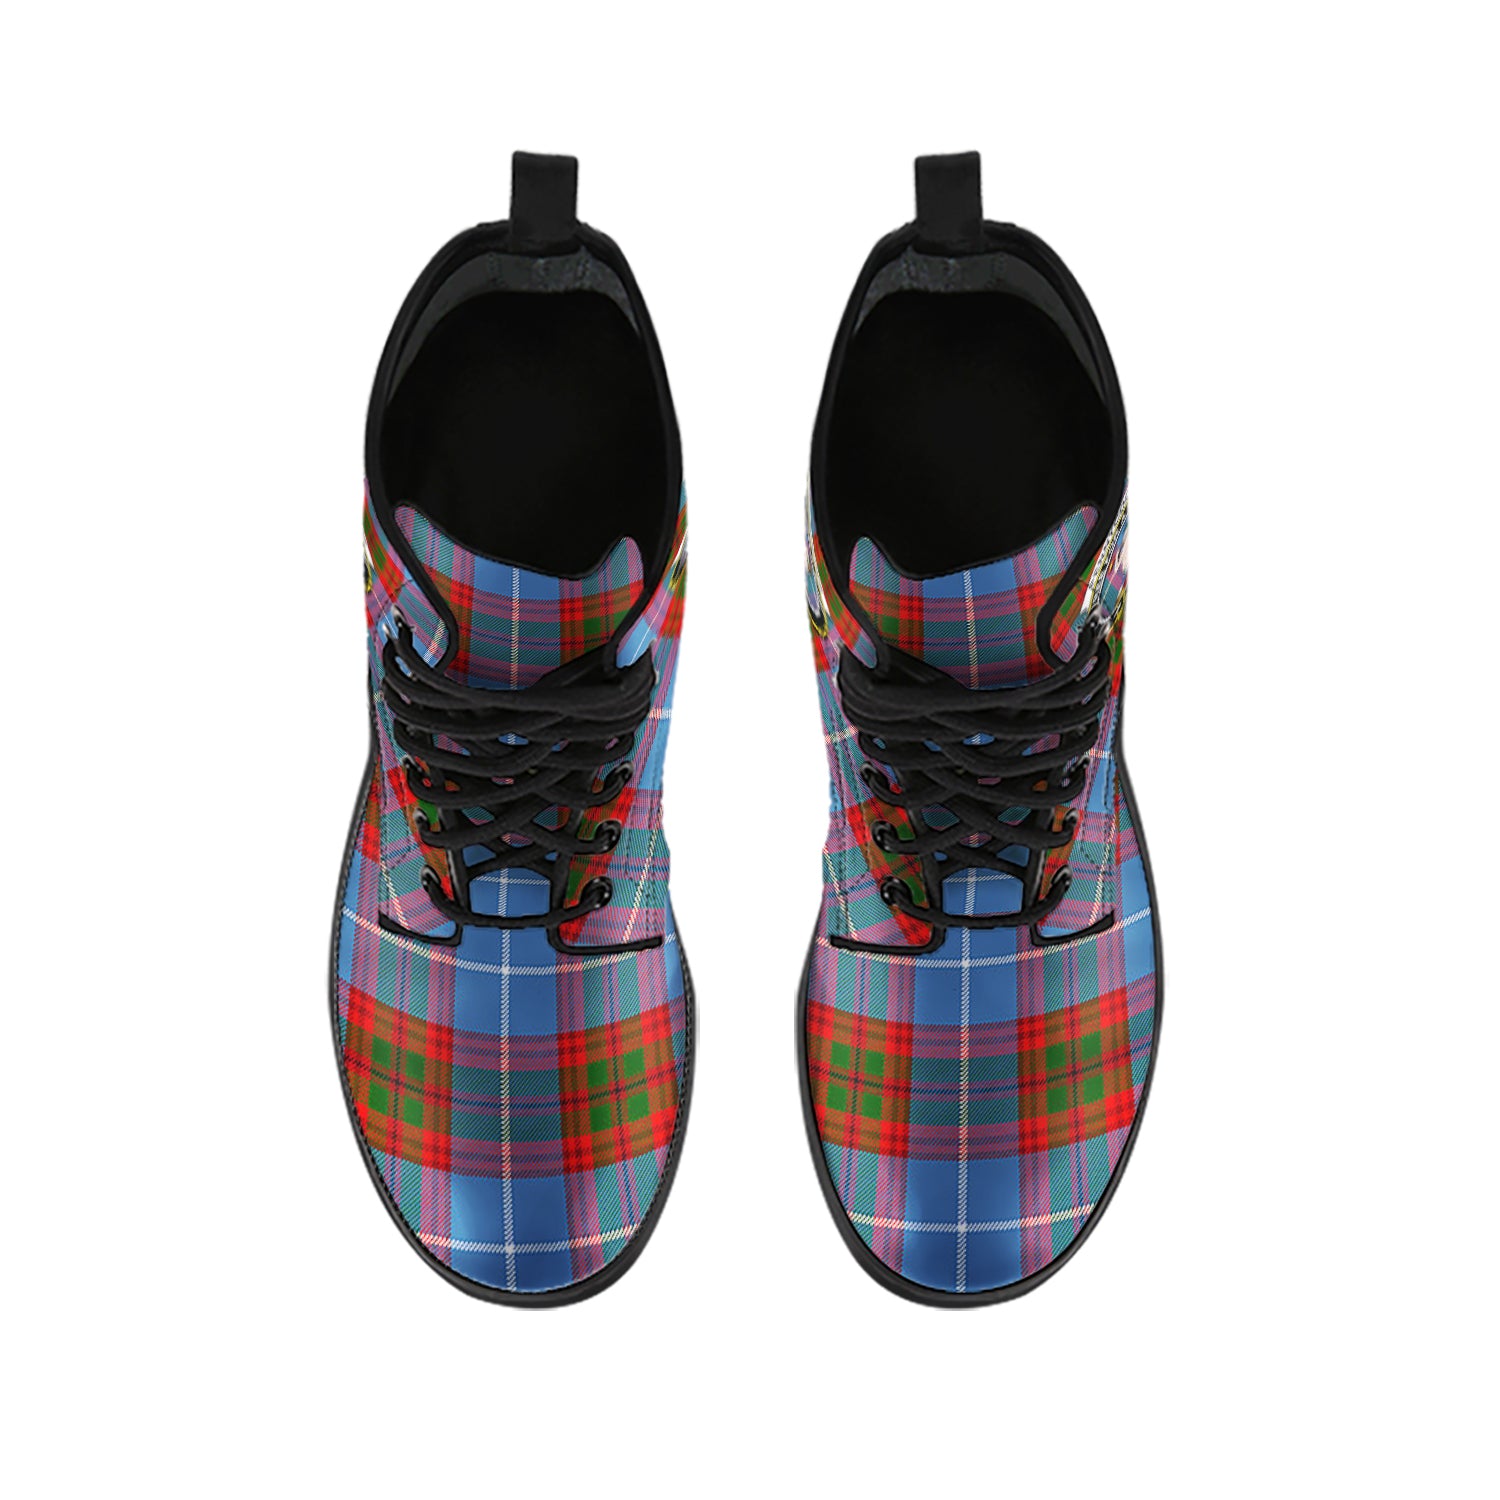 pennycook-tartan-leather-boots-with-family-crest